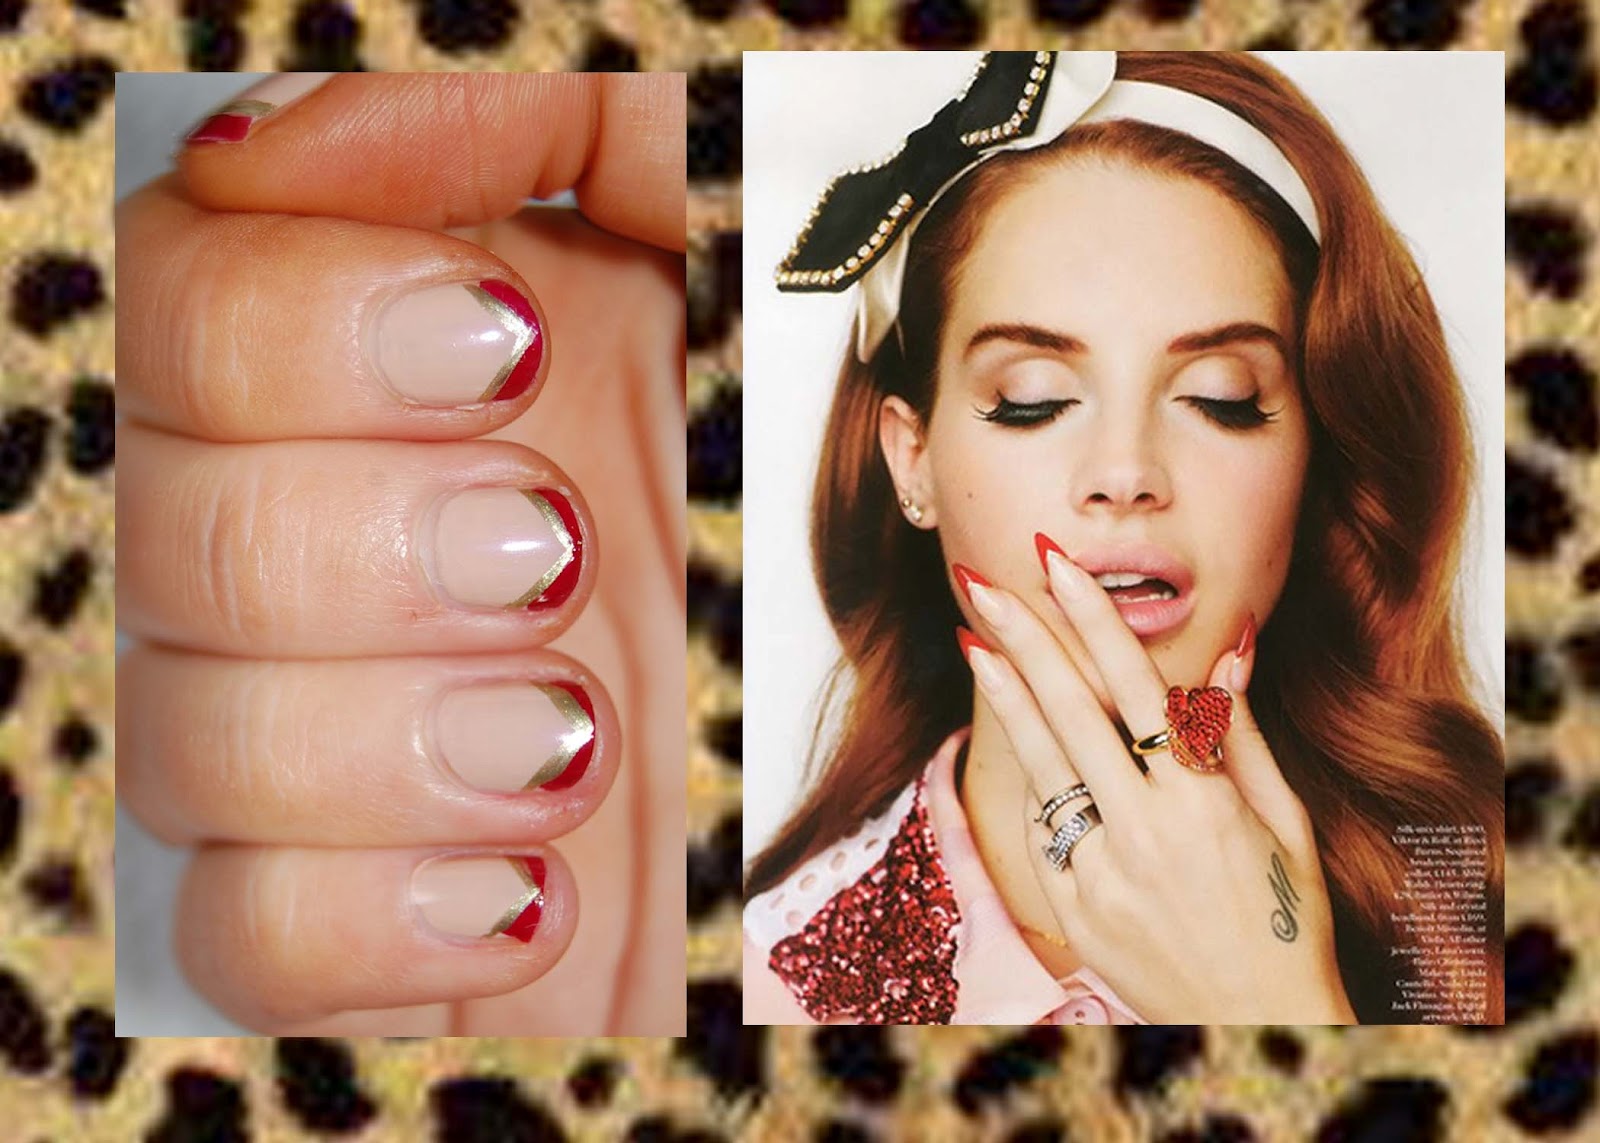 3. "Lana Del Rey themed nails" - wide 1